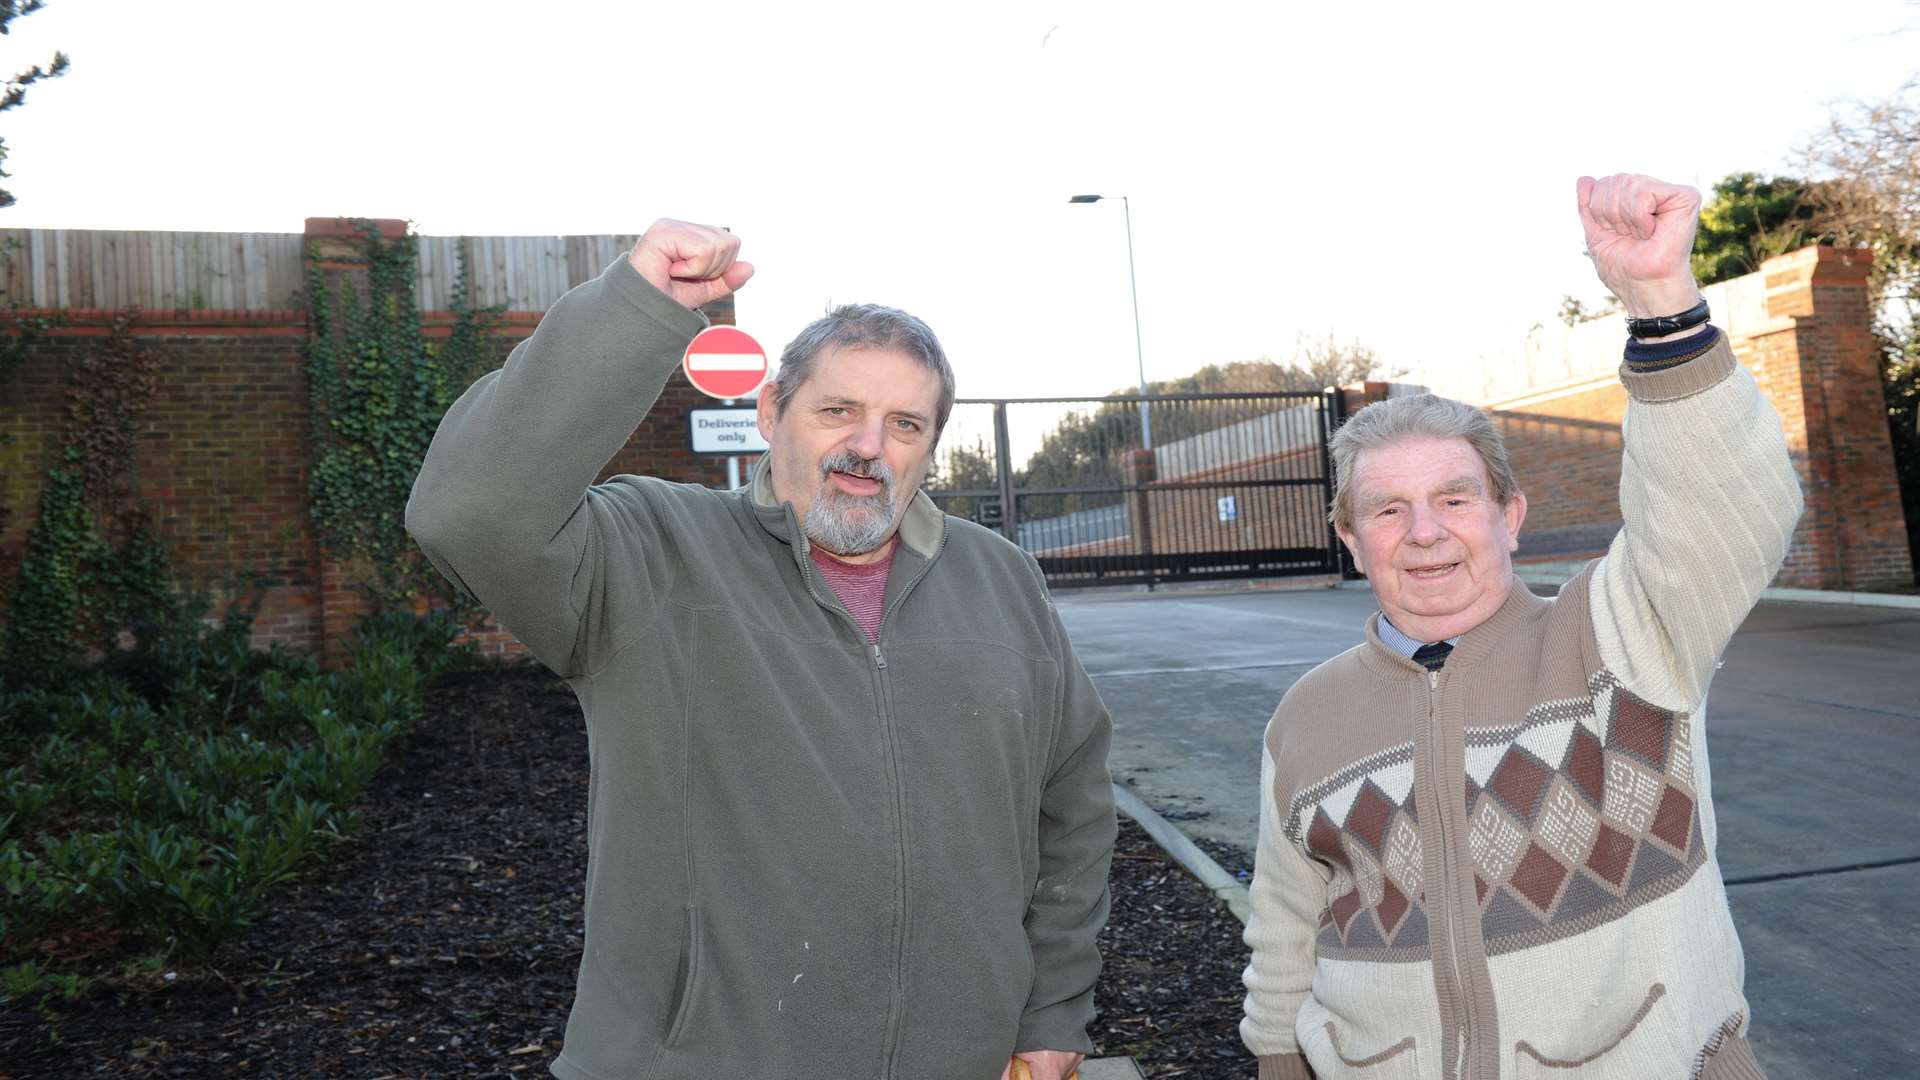 Colin Mattick and Colin Meredith standing outside the Sainsbury's delivery yard